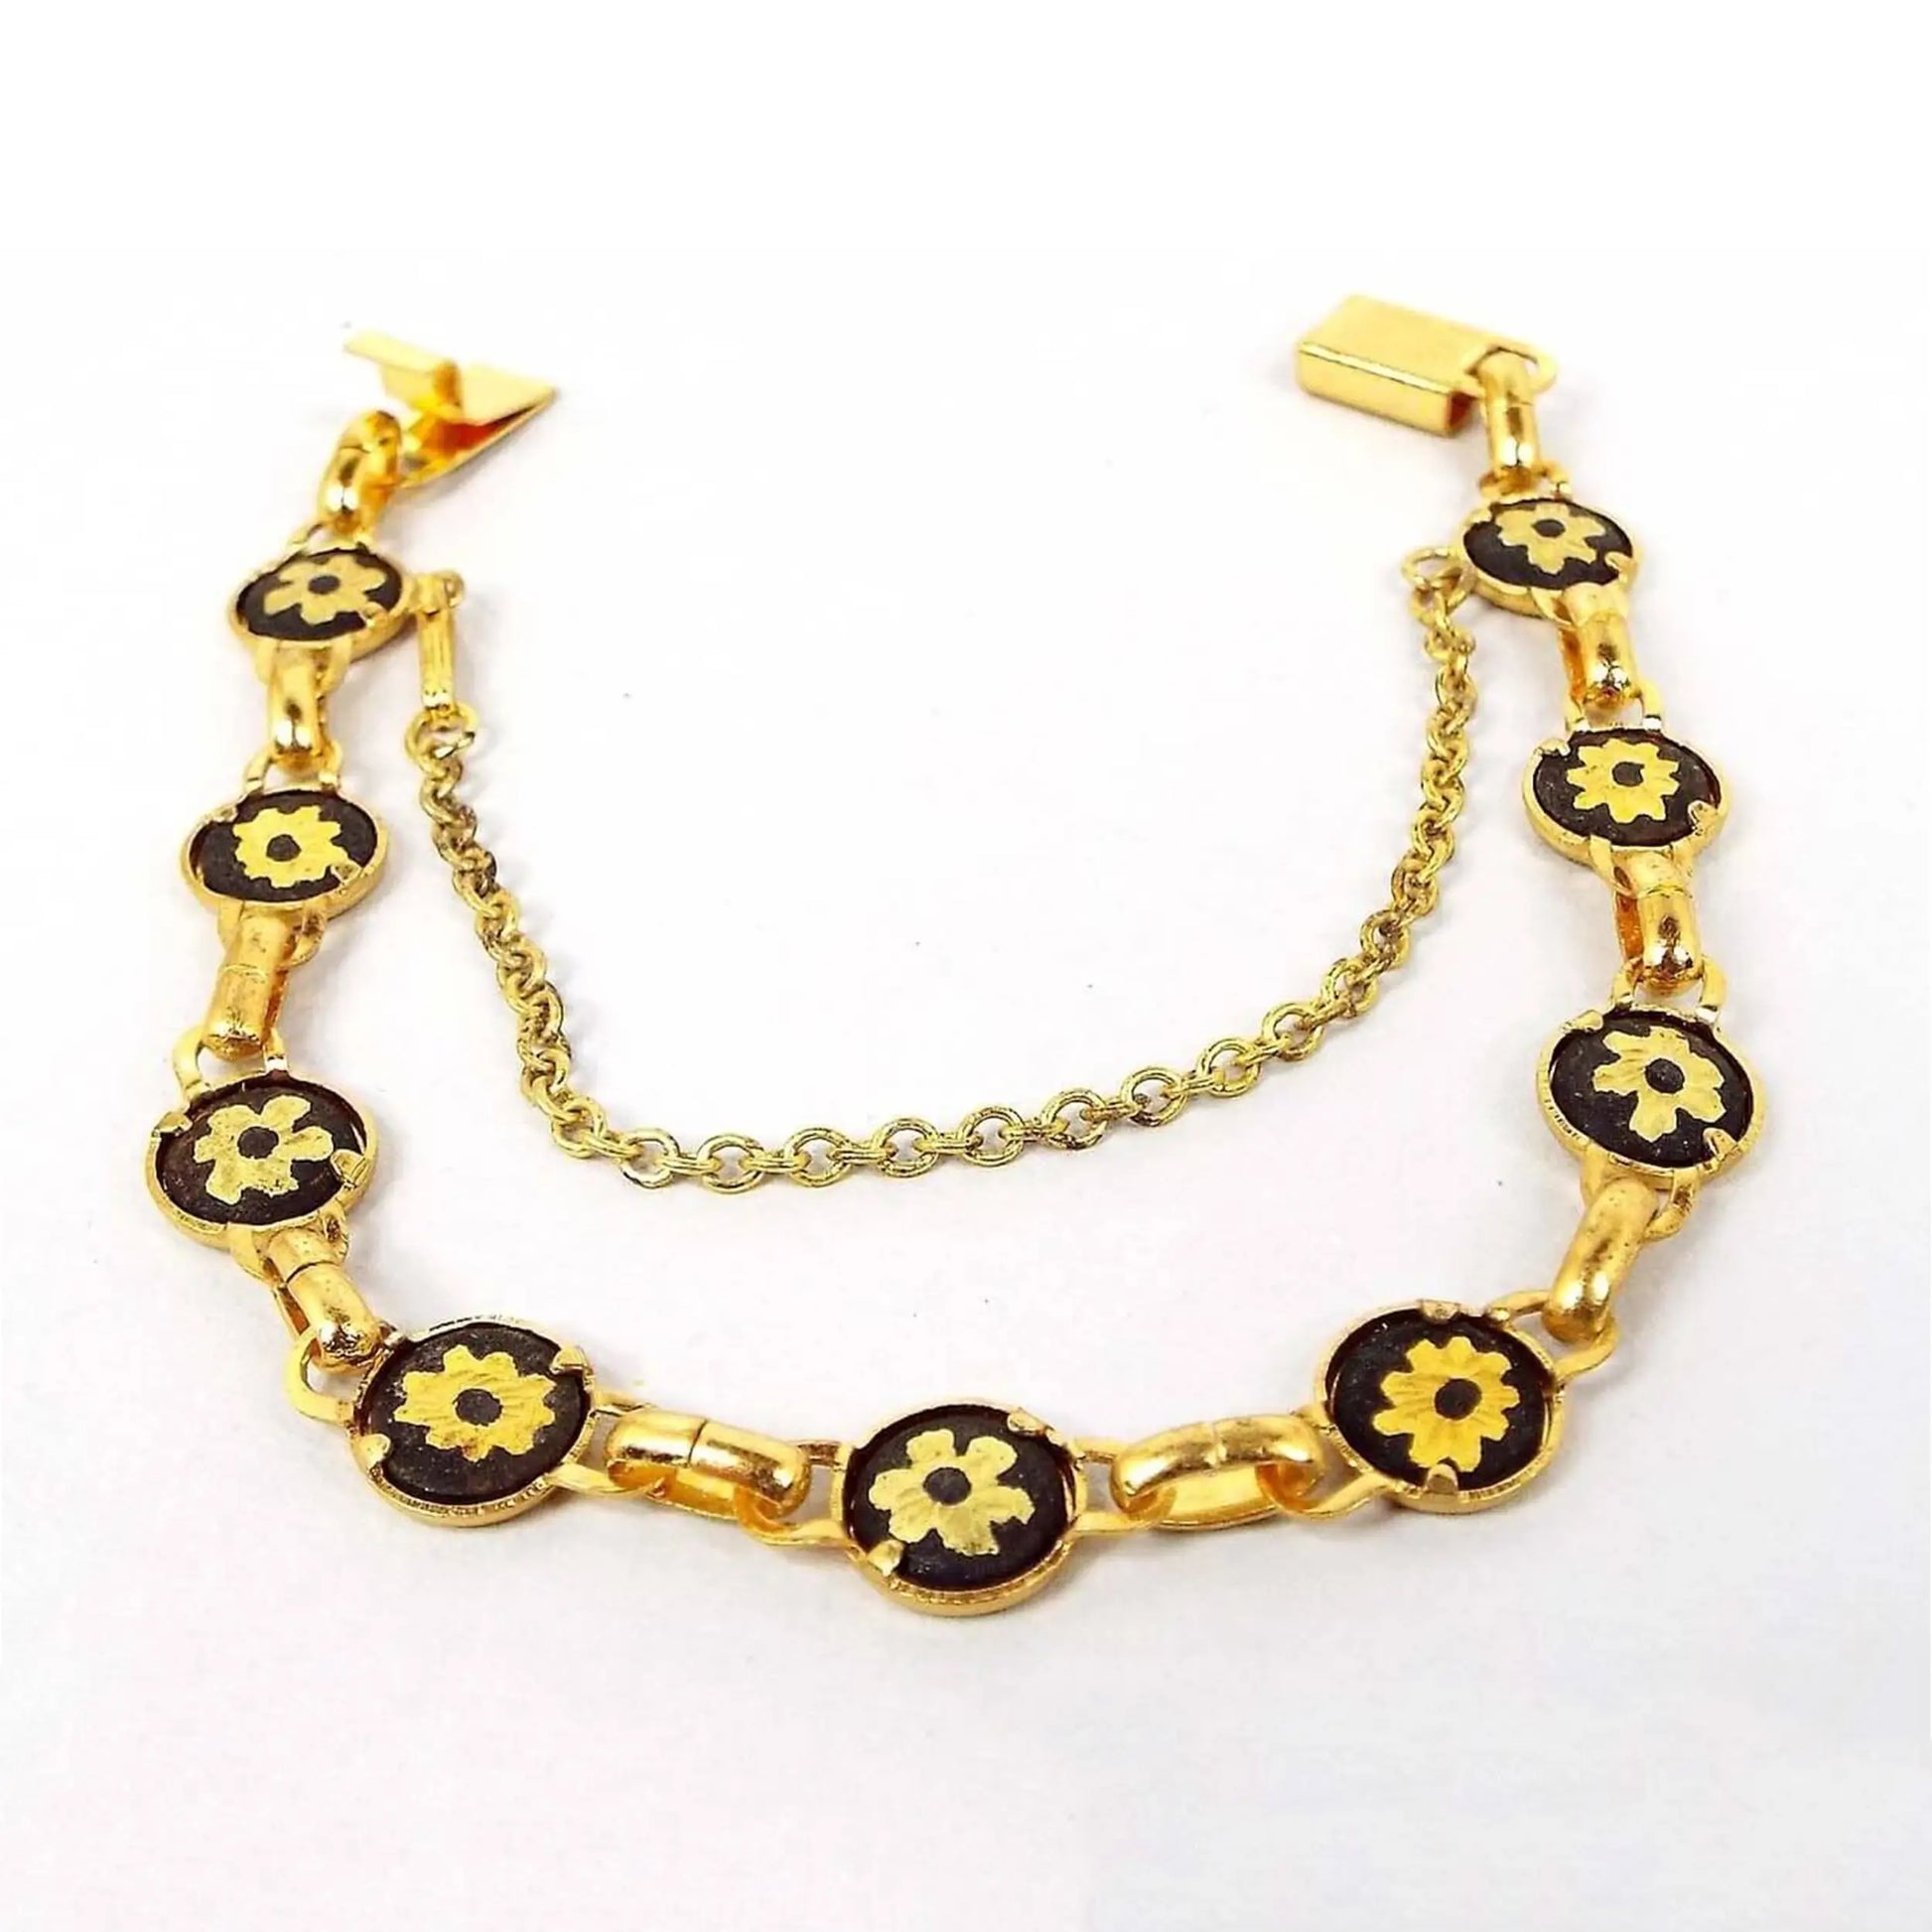 Front view of the retro vintage Damascene style bracelet. It is gold tone in color. The round links are painted black and have a gold tone flower design in the middle. There is a box clasp at the end and a safety chain with a hinged clip clasp as well.